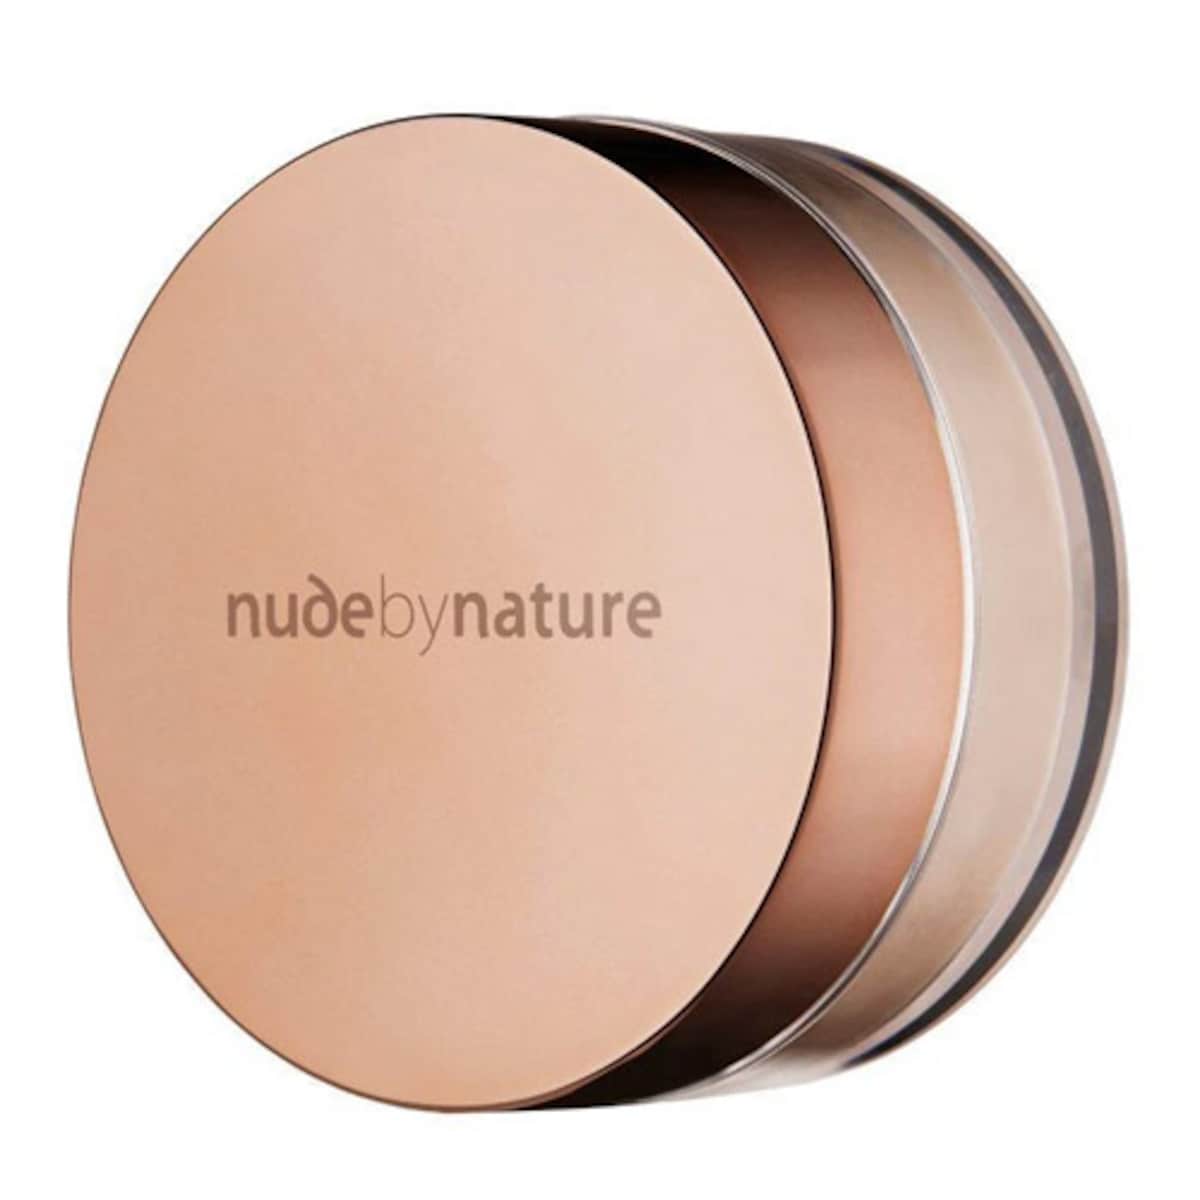 Nude by Nature Translucent Loose Finishing Powder 01 Natural 10g